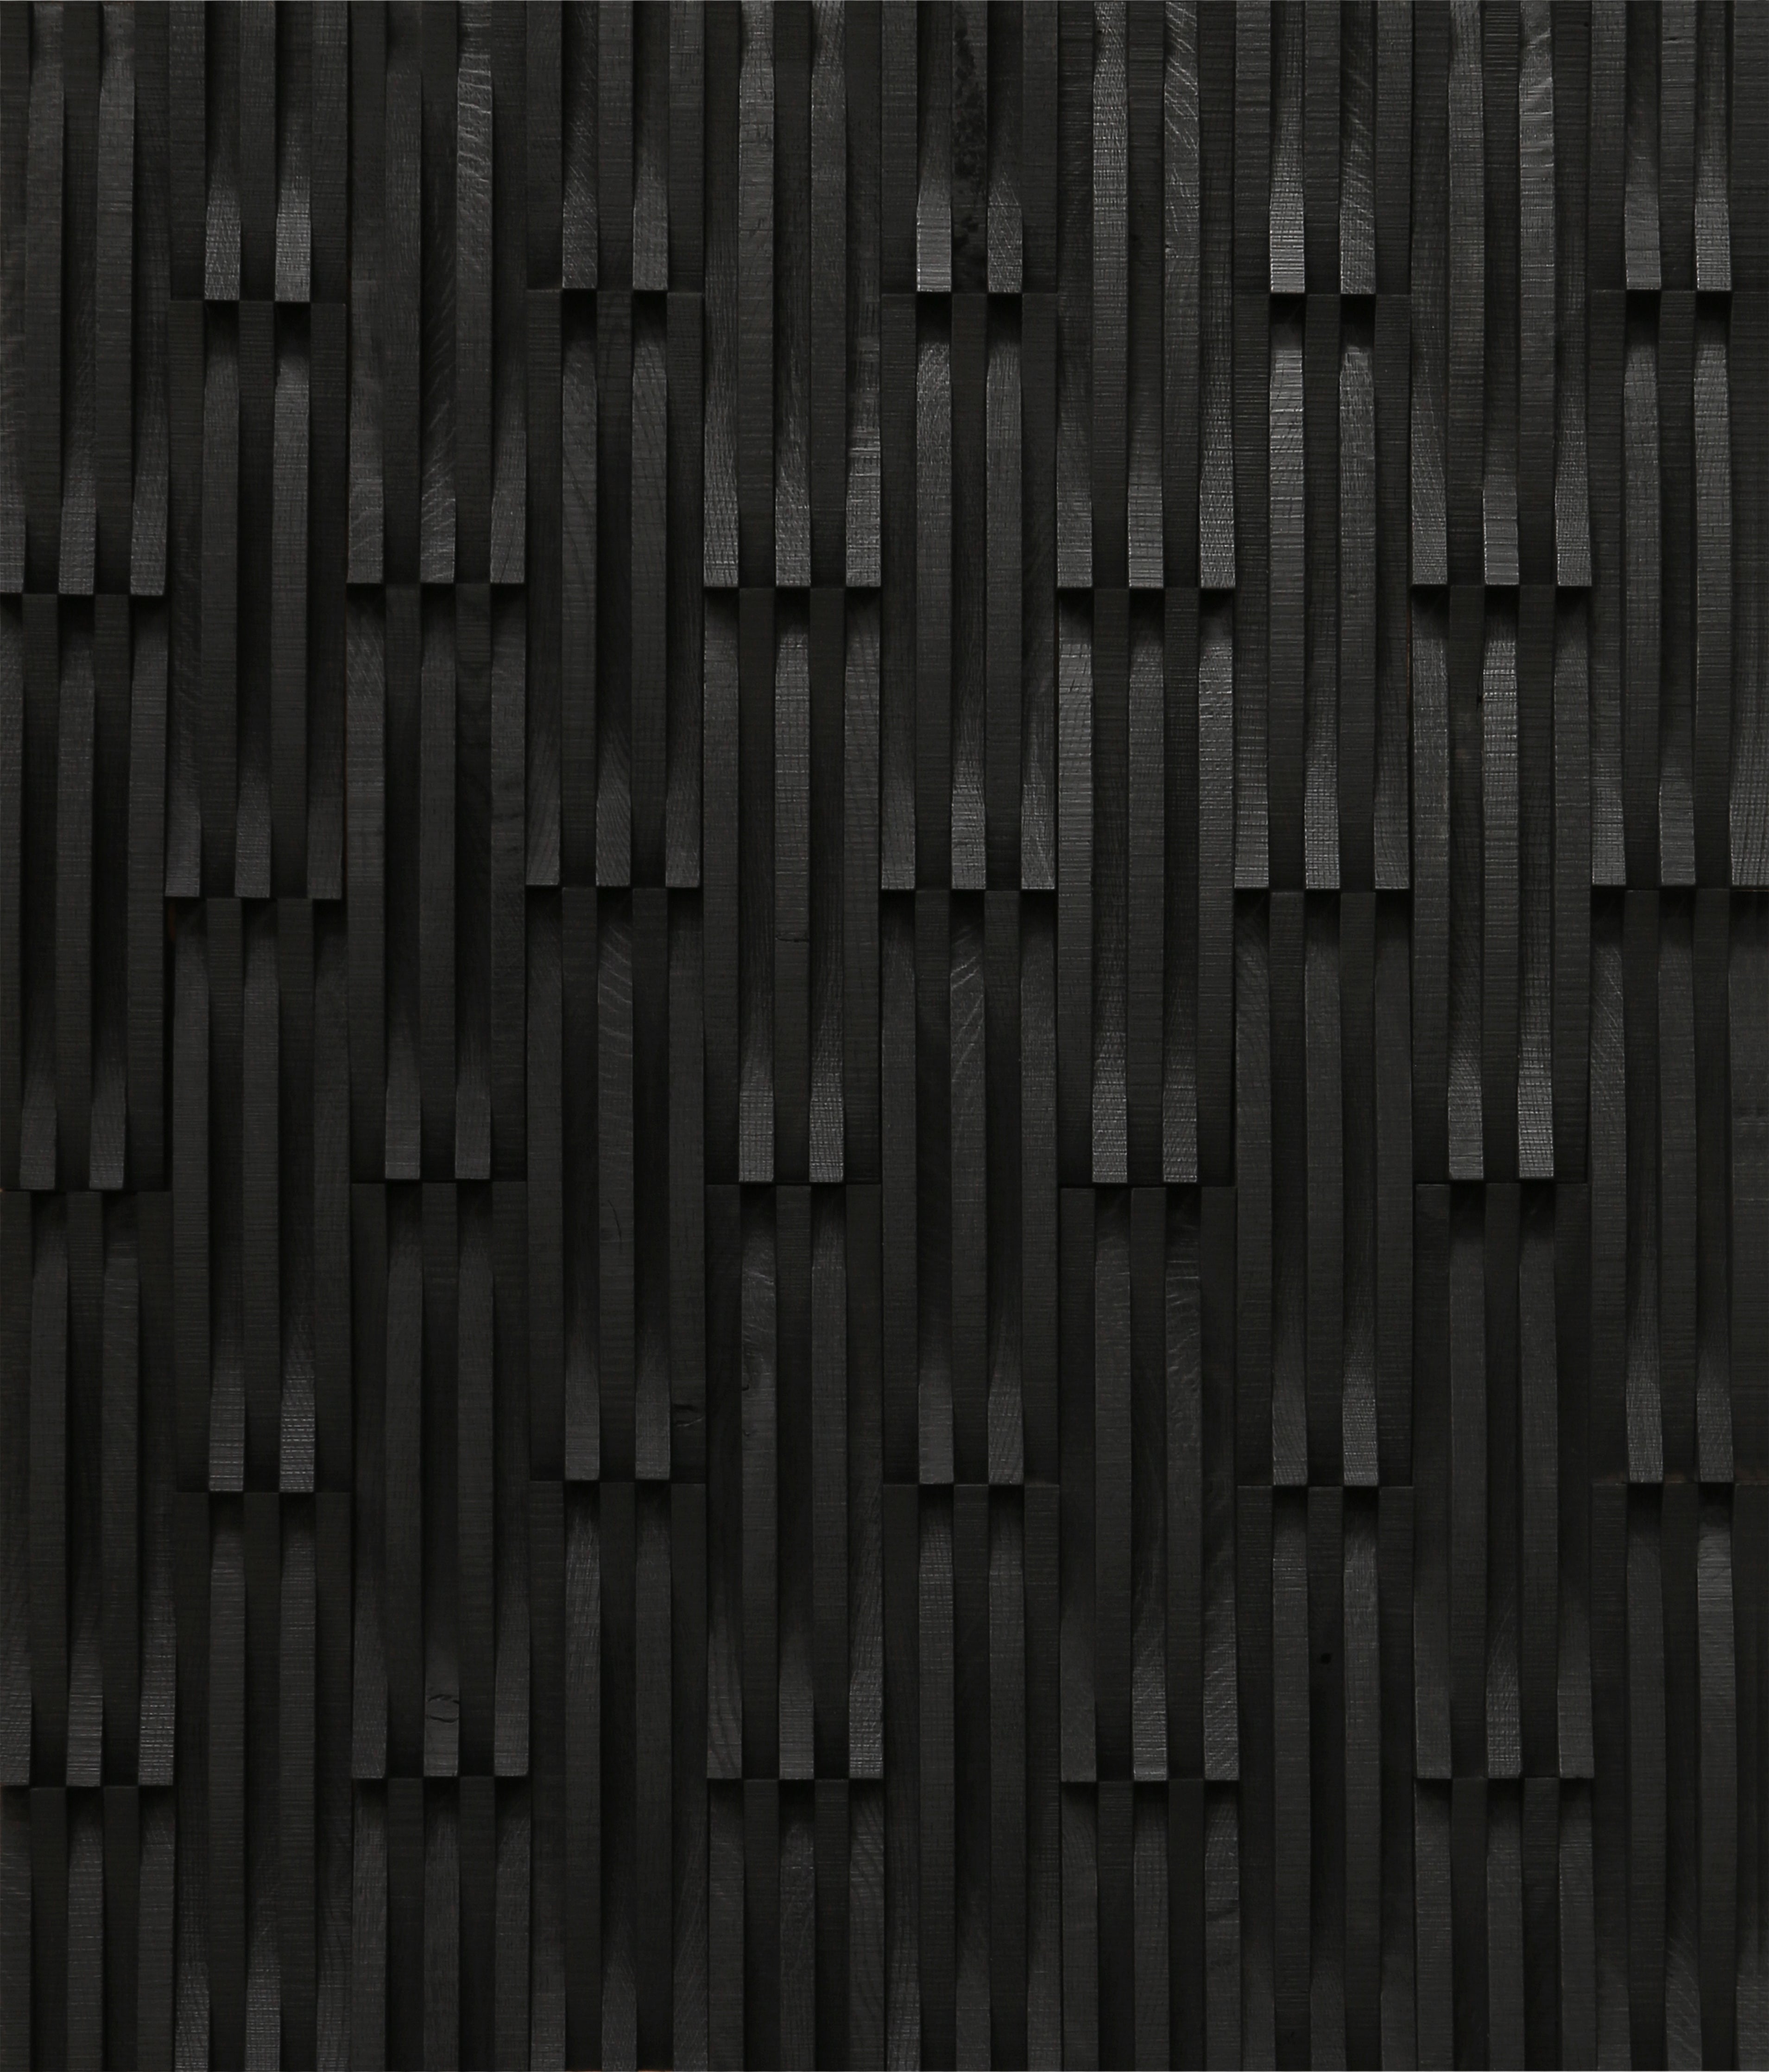 duchateau inceptiv curva noir oak three dimensional wall natural wood panel lacquer for interior use distributed by surface group international